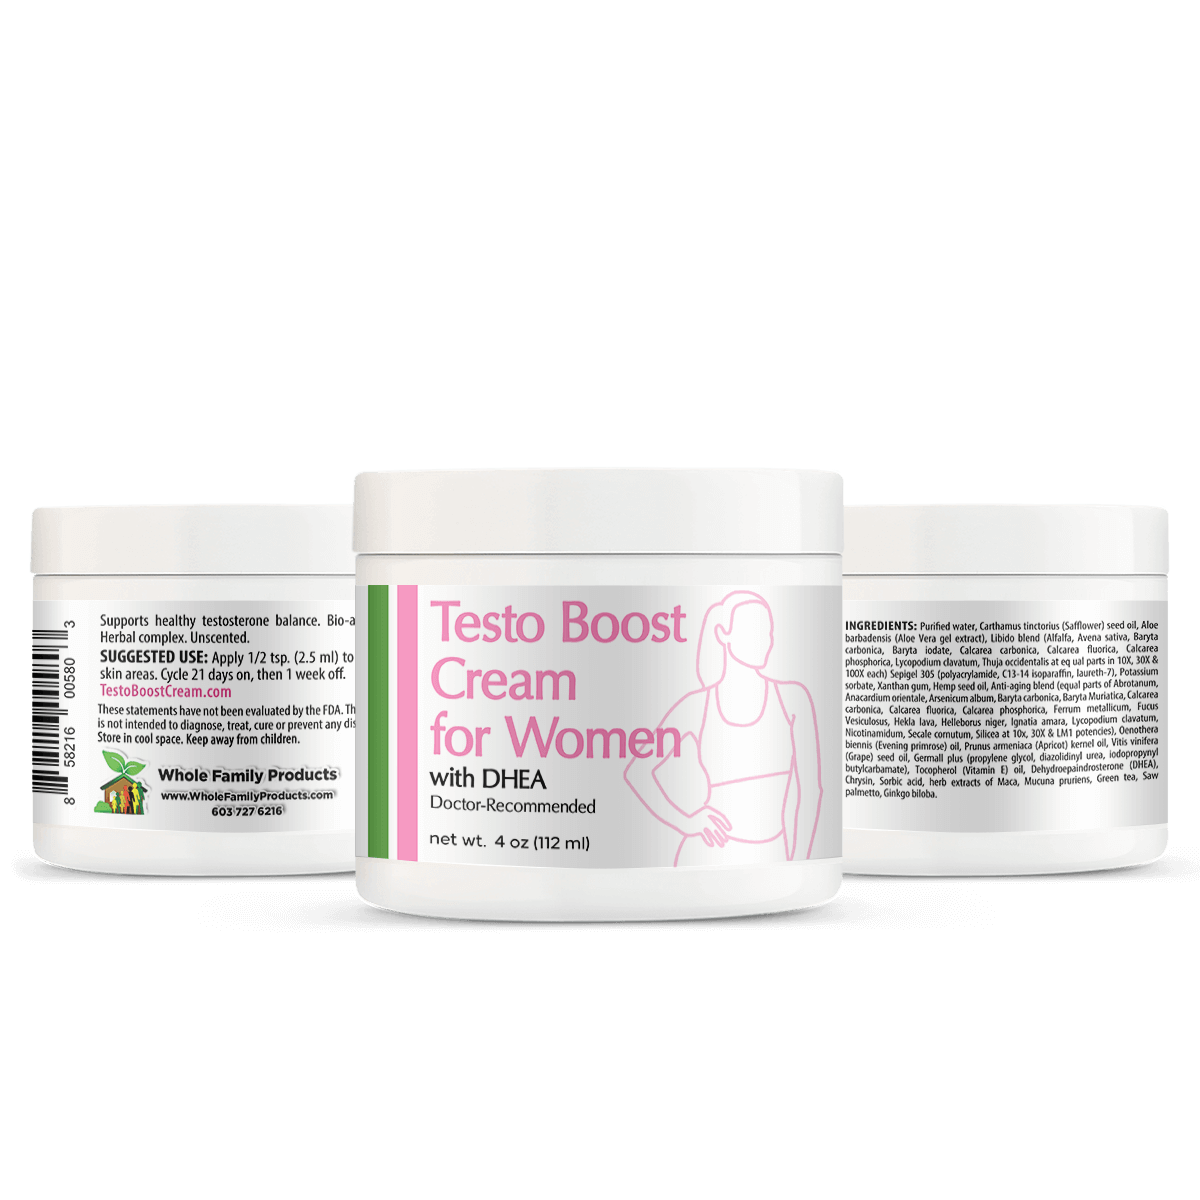 Testo Boost Cream for Women with DHEA - Best Testosterone Booster for Women